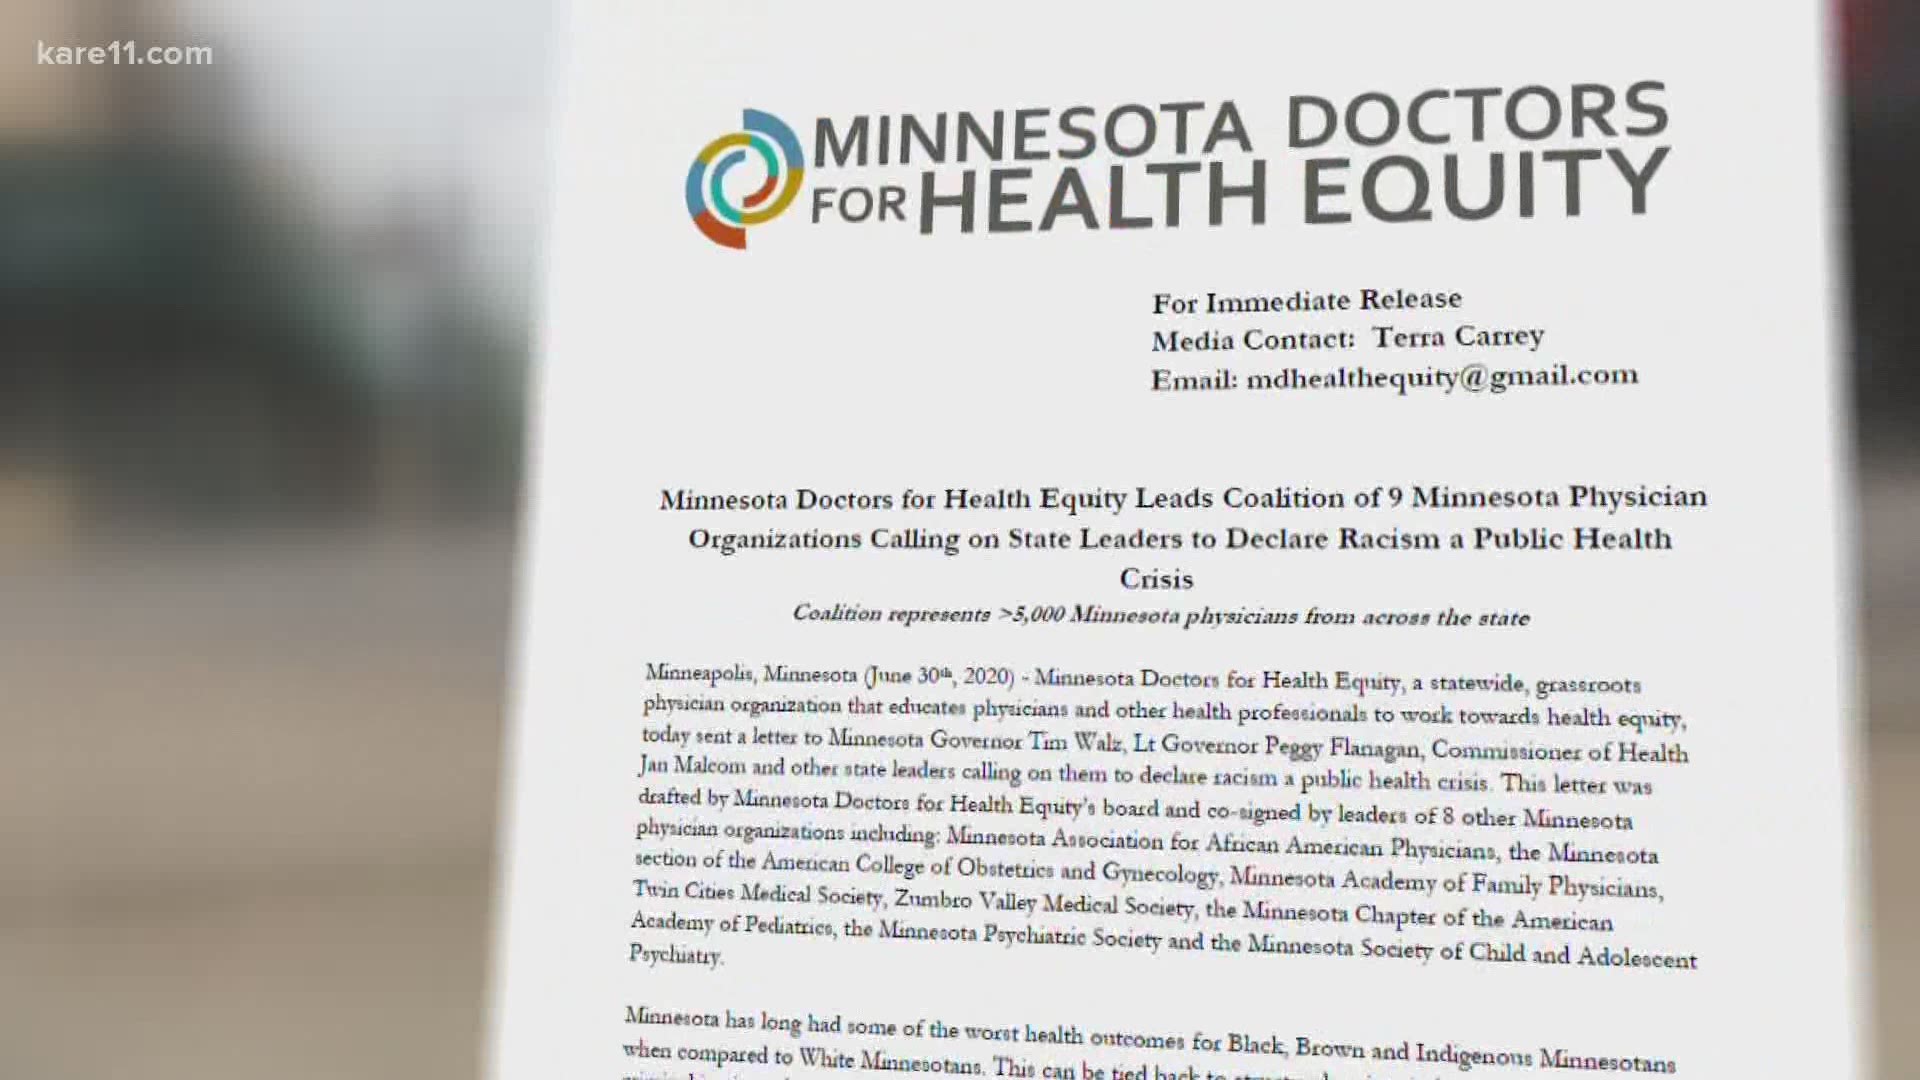 The Minnesota Doctors for Health Equity represents more than 5,000 physicians in the state of Minnesota.